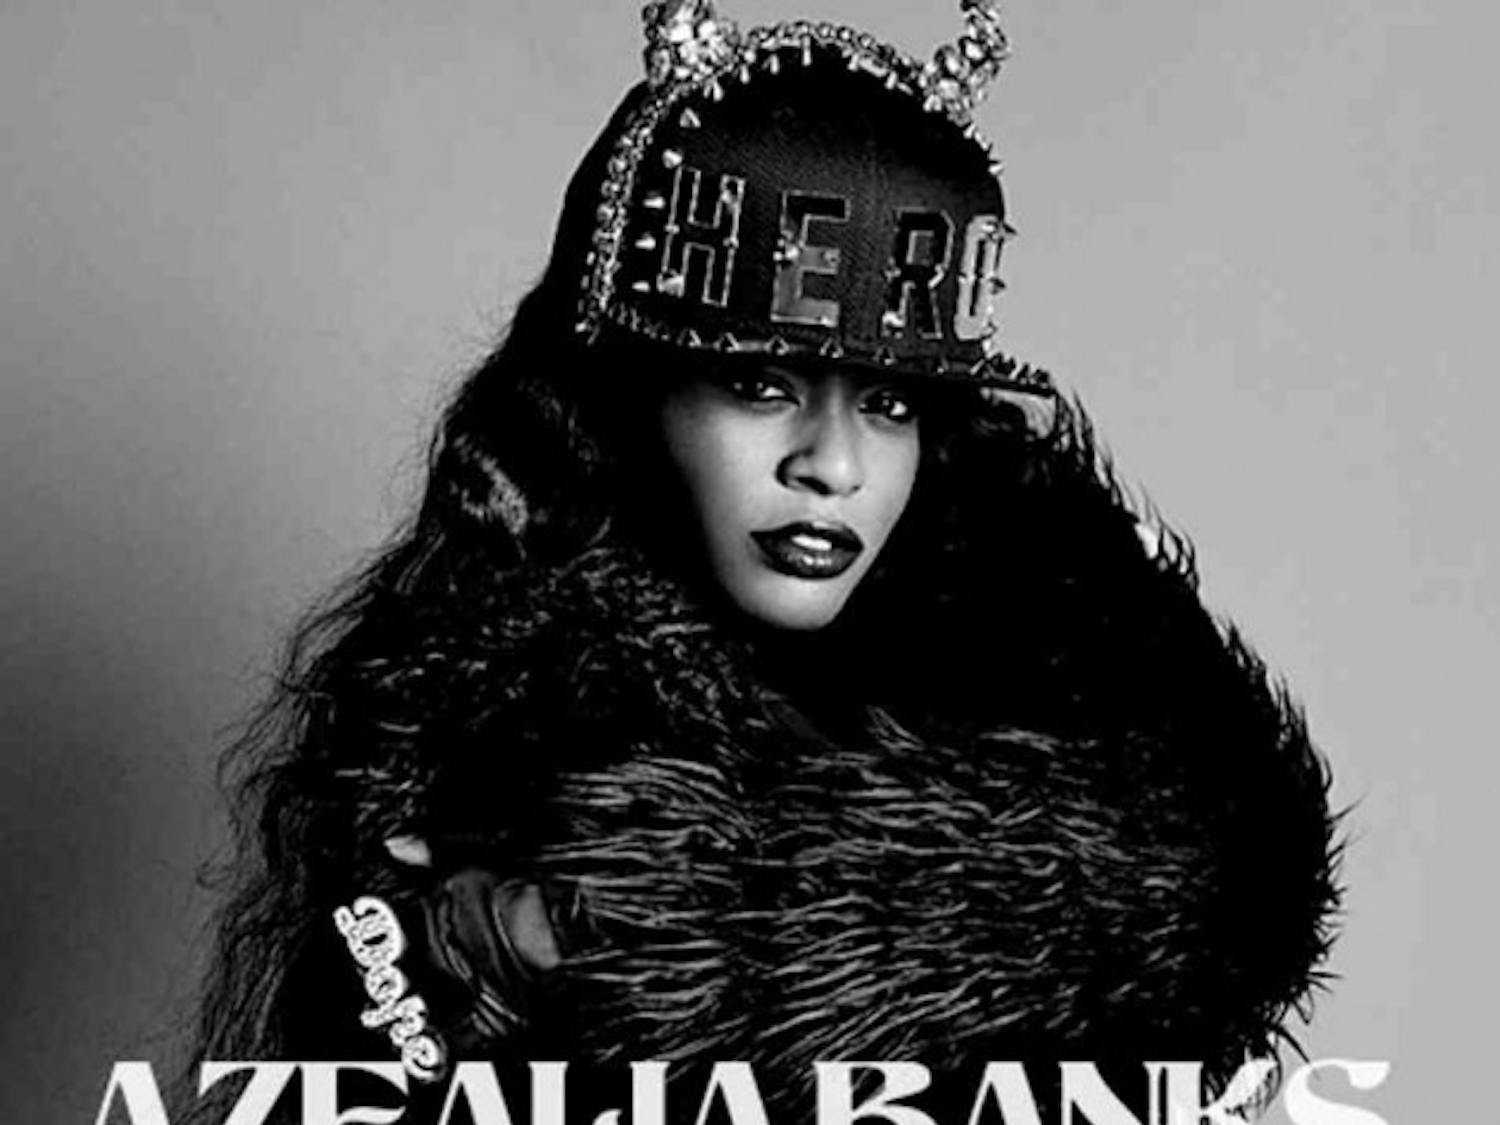 Azealia Banks&nbsp;self-released album dropped on Nov. 6 without warning&nbsp;
and the new tracks have a uniquely&nbsp;Azealia Banks&nbsp;sound.&nbsp;
Courtesy of whatsupwhatson.com